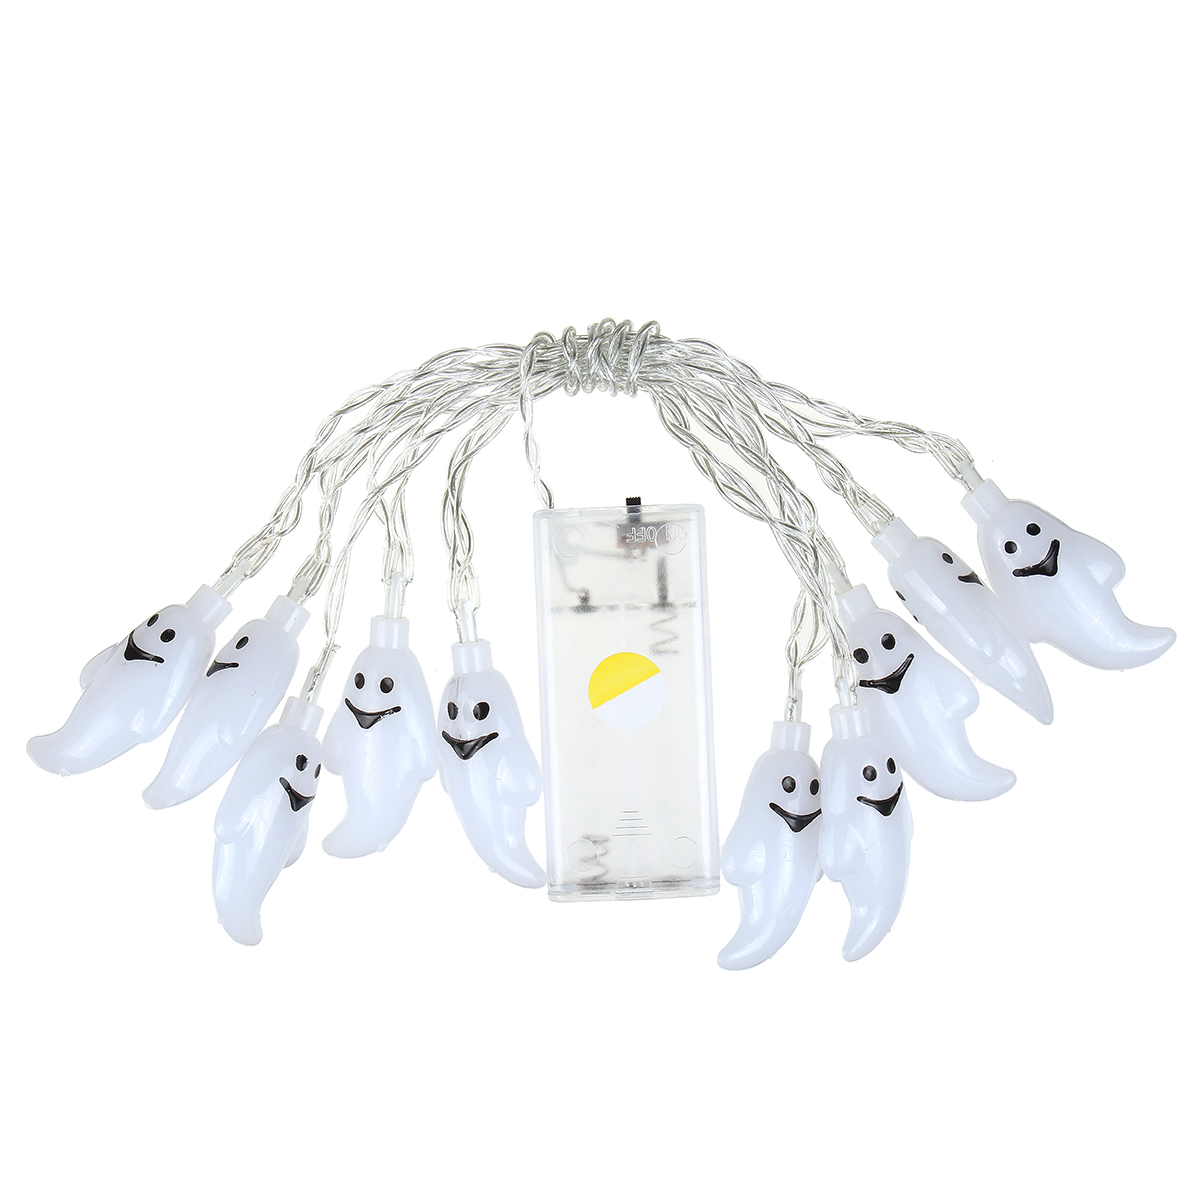 Specter-Skeleton-Ghost-Eyes-Pattern-Halloween-LED-String-Light-Holiday-Funny-Party-Outdoor-Indoor-De-1567228-2